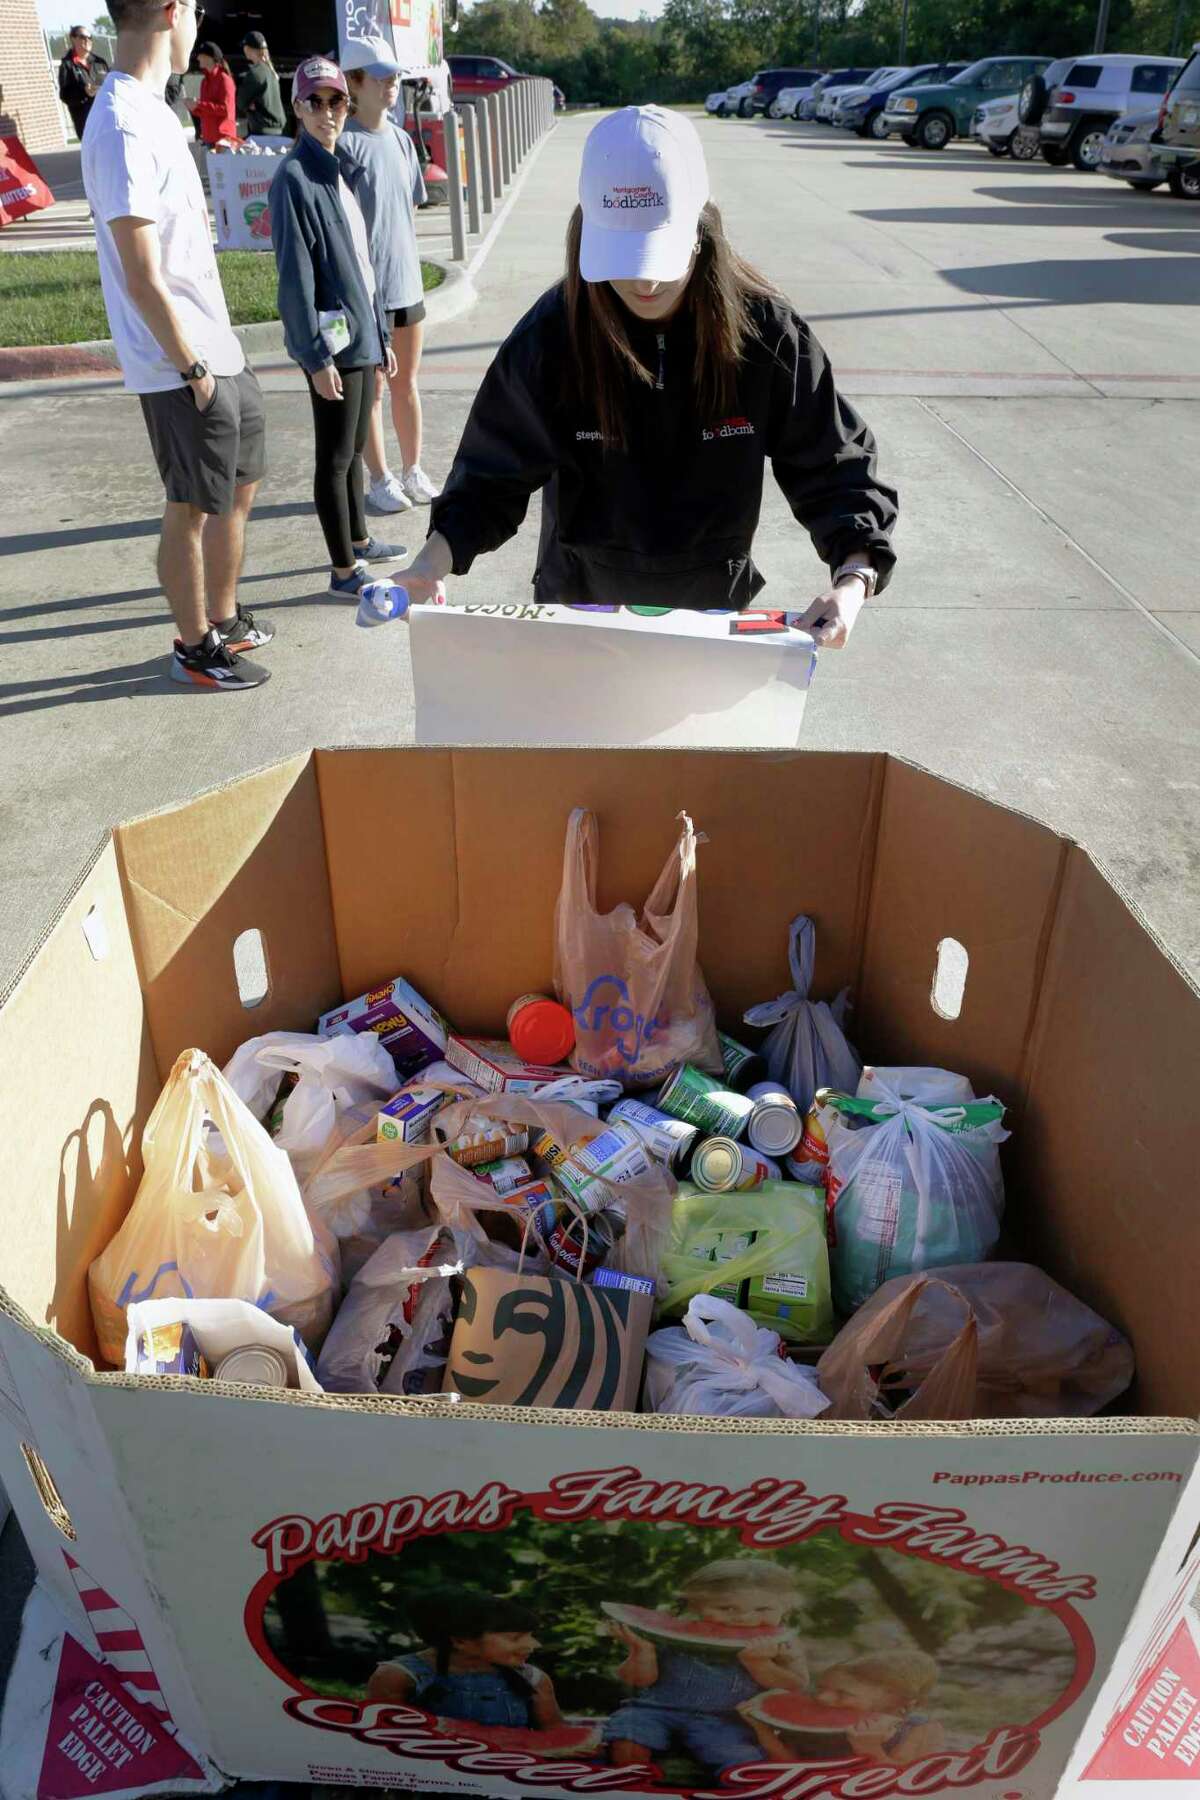 Stephanie Arend, with the Montgomery County Food Bank, tapes signs onto food donation bins for participant drop offs during the first Montgomery ISD Walkathon for Hunger held at the Montgomery Jr. High School track Saturday, Oct. 16, 2021 in Montgomery, TX.